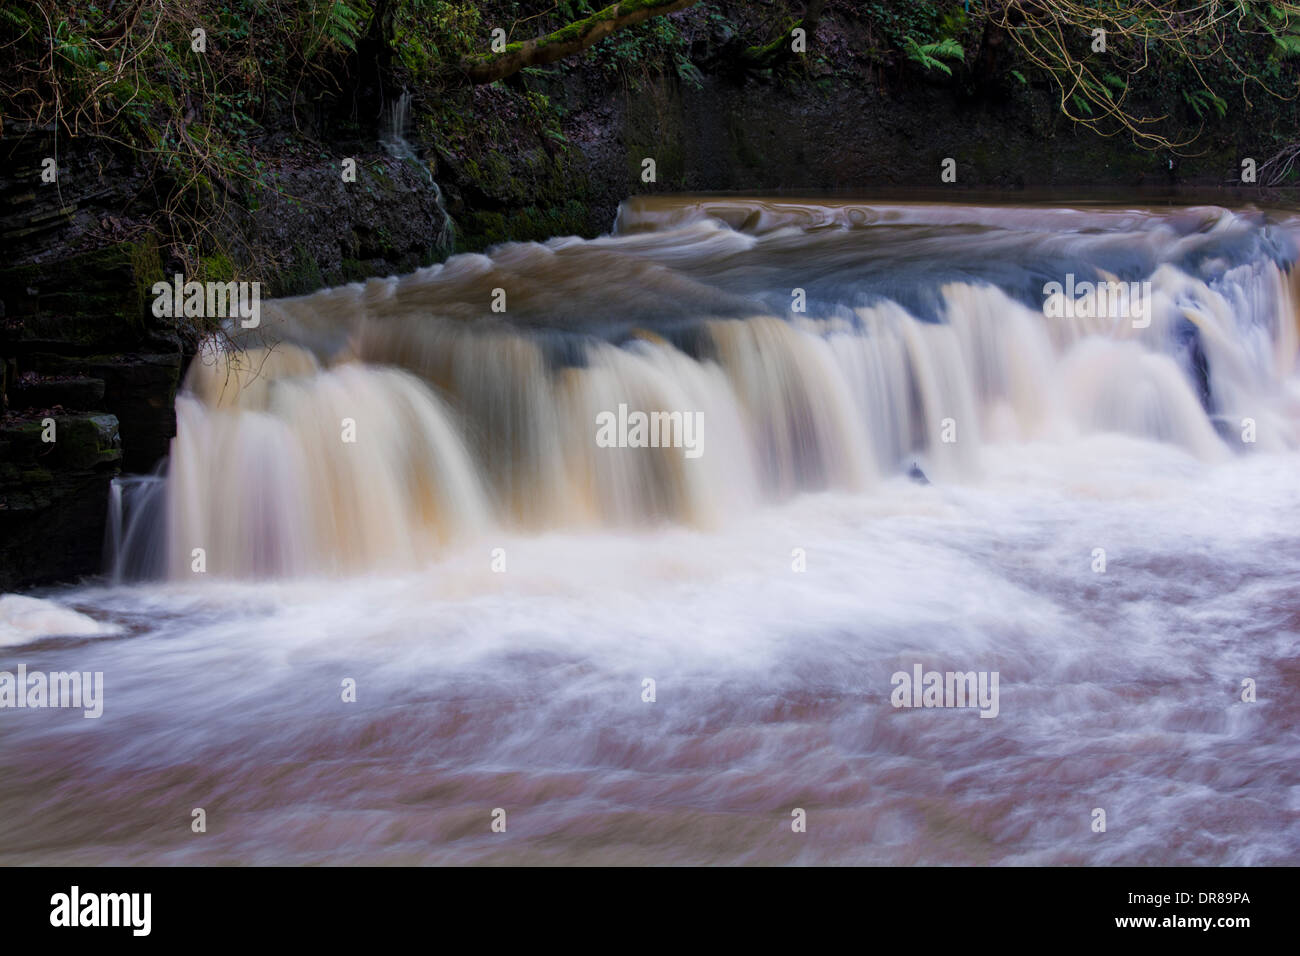 Slow exposure of water flowing over weir Stock Photo